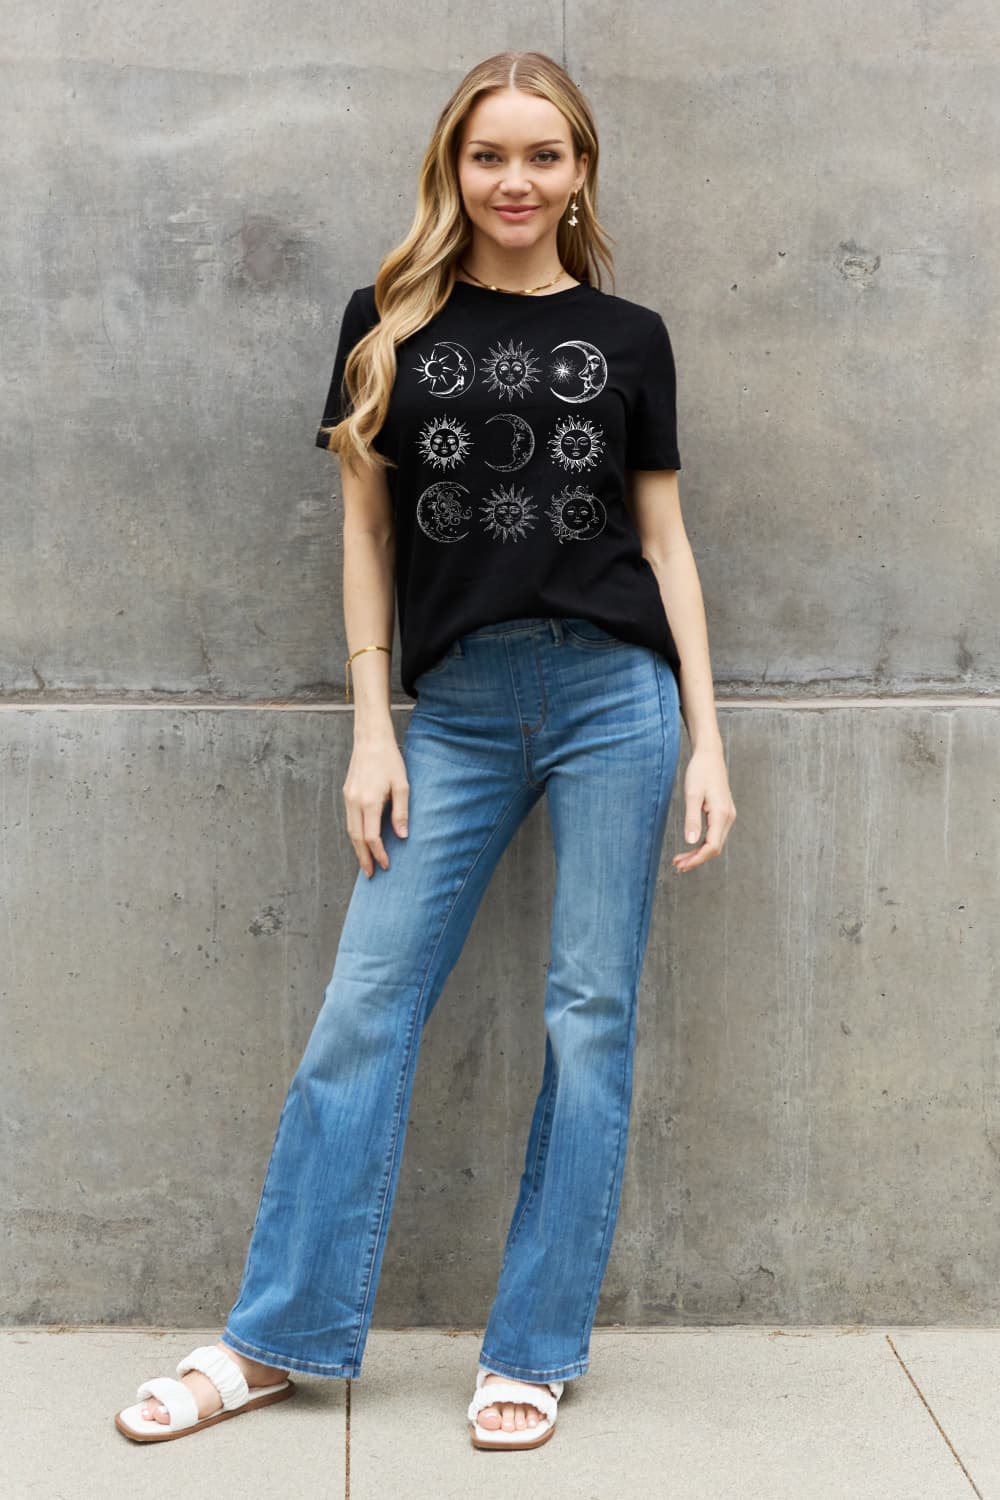 Moon and Sun Celestial Spiritual Graphic 100% Cotton Short-sleeve Tee (Plus Size Available)